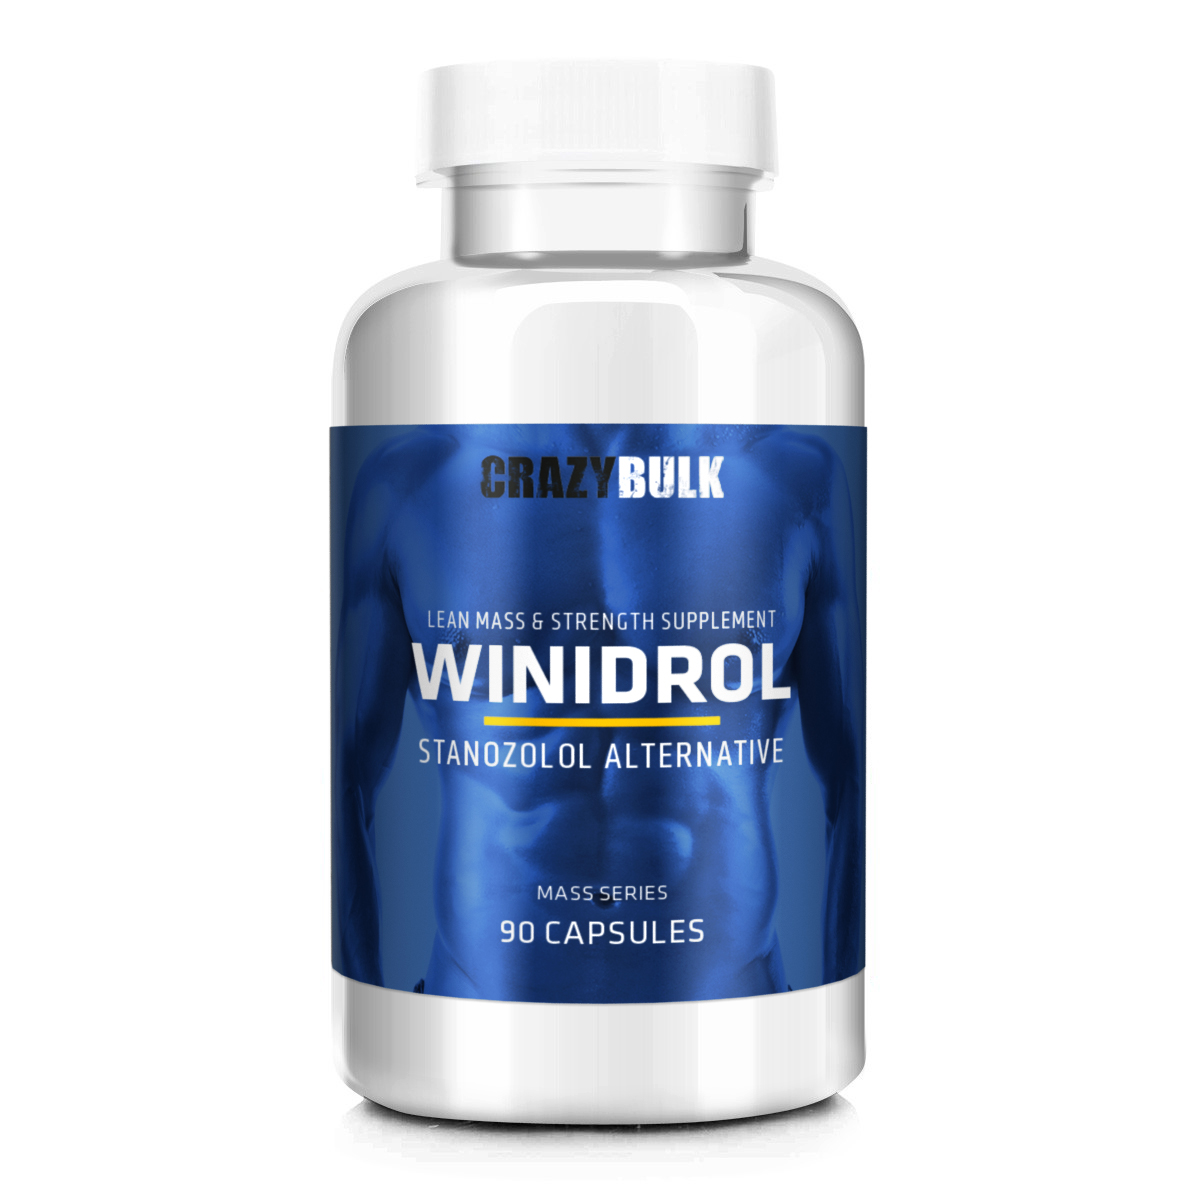 Winstrol Tablets (Winadrol review): Reviews, Results, Side Effects